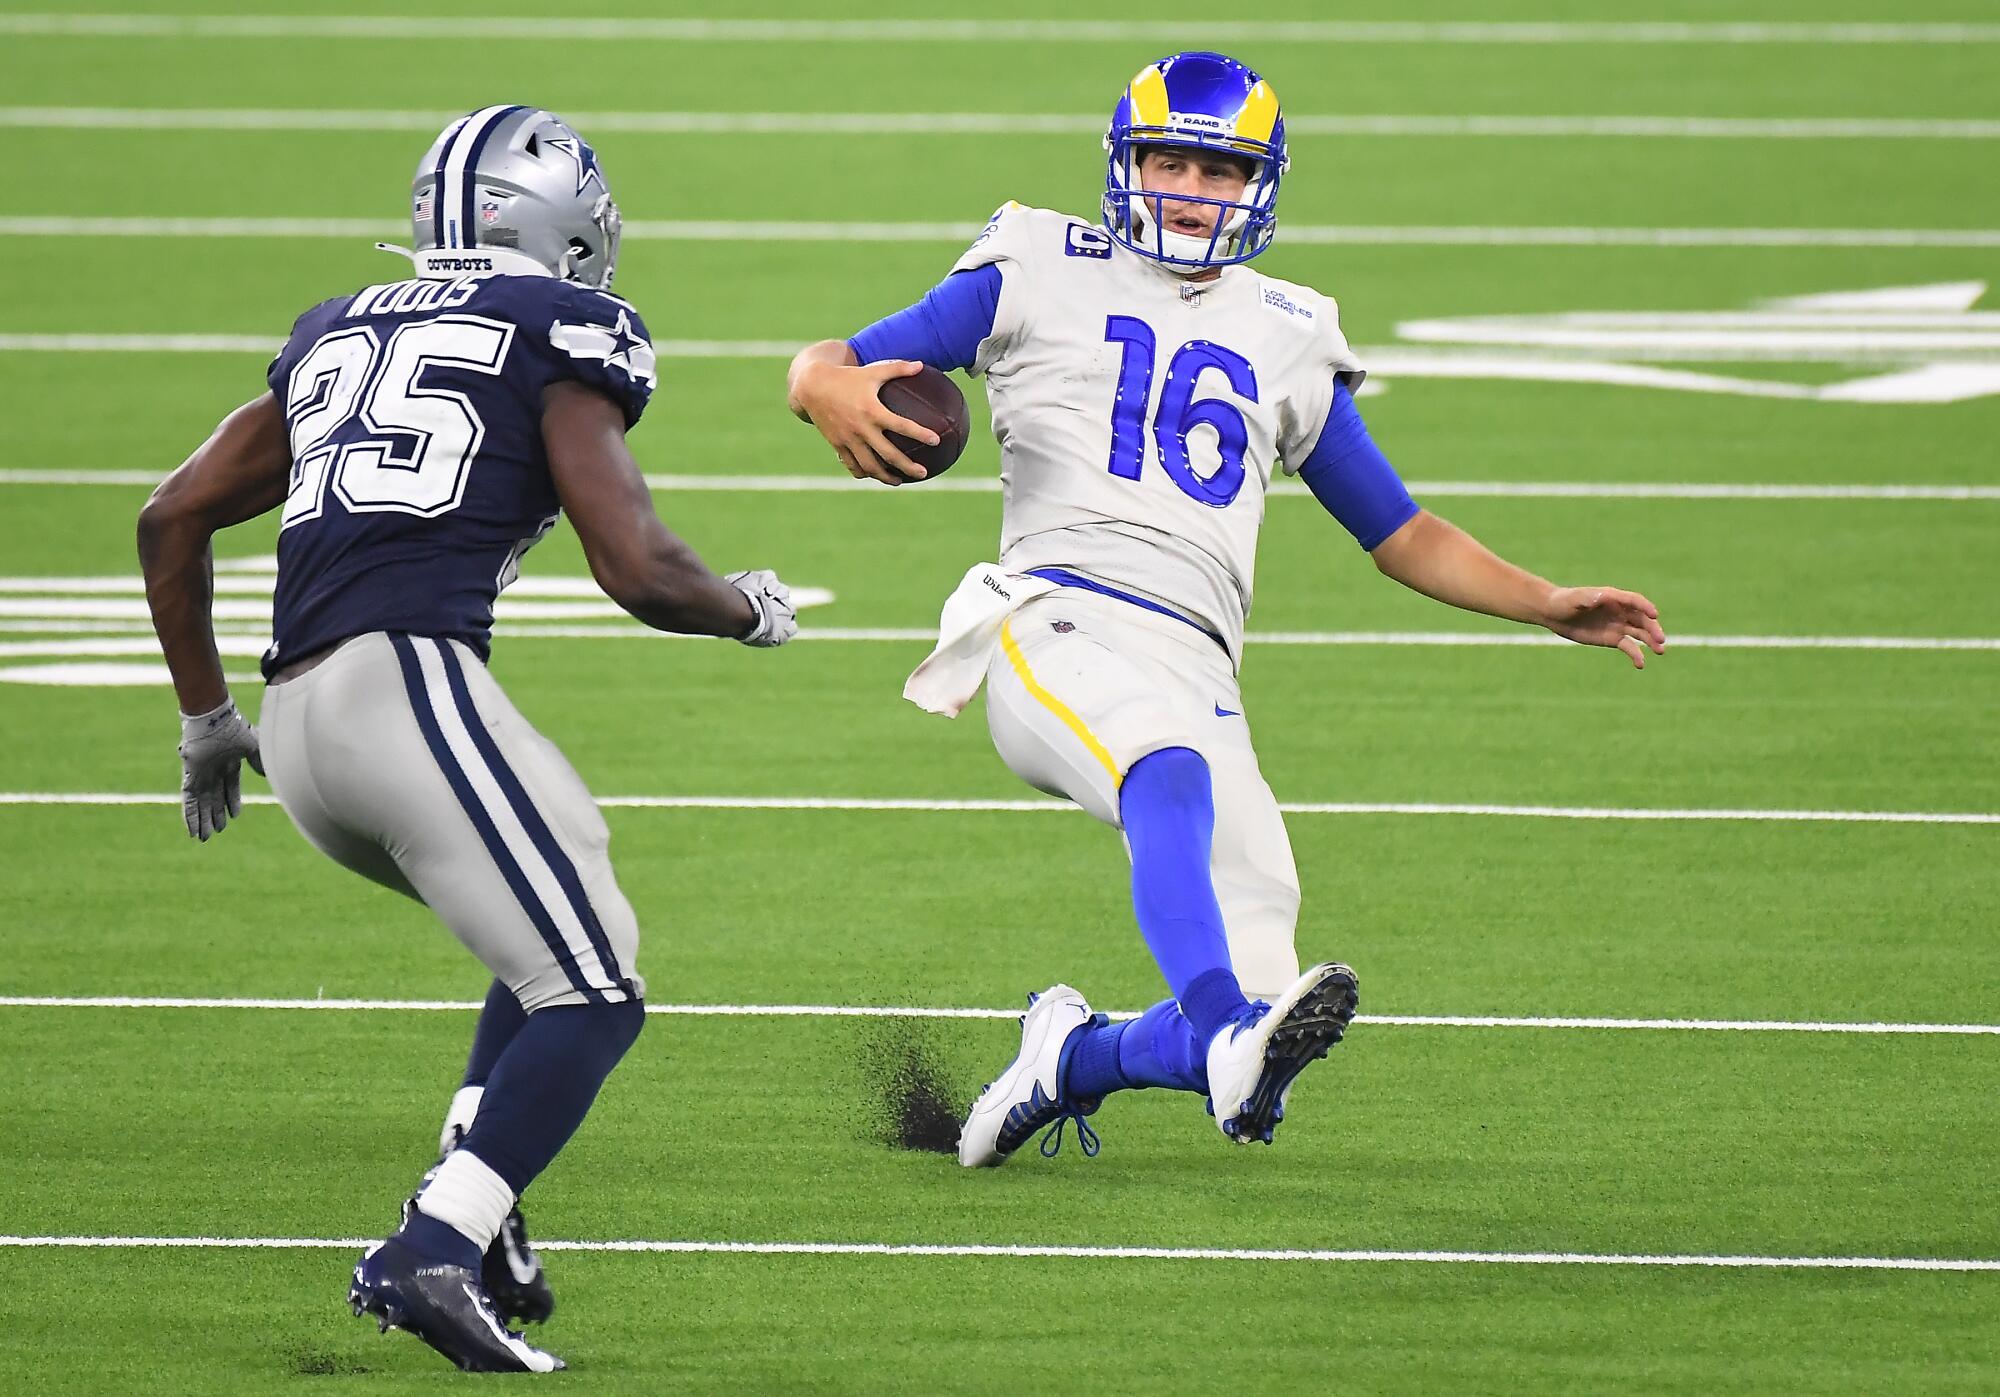 Rams quarterback Jared Goff slides before being tackled by Cowboys safety Xavier Woods in the fourth quarter.